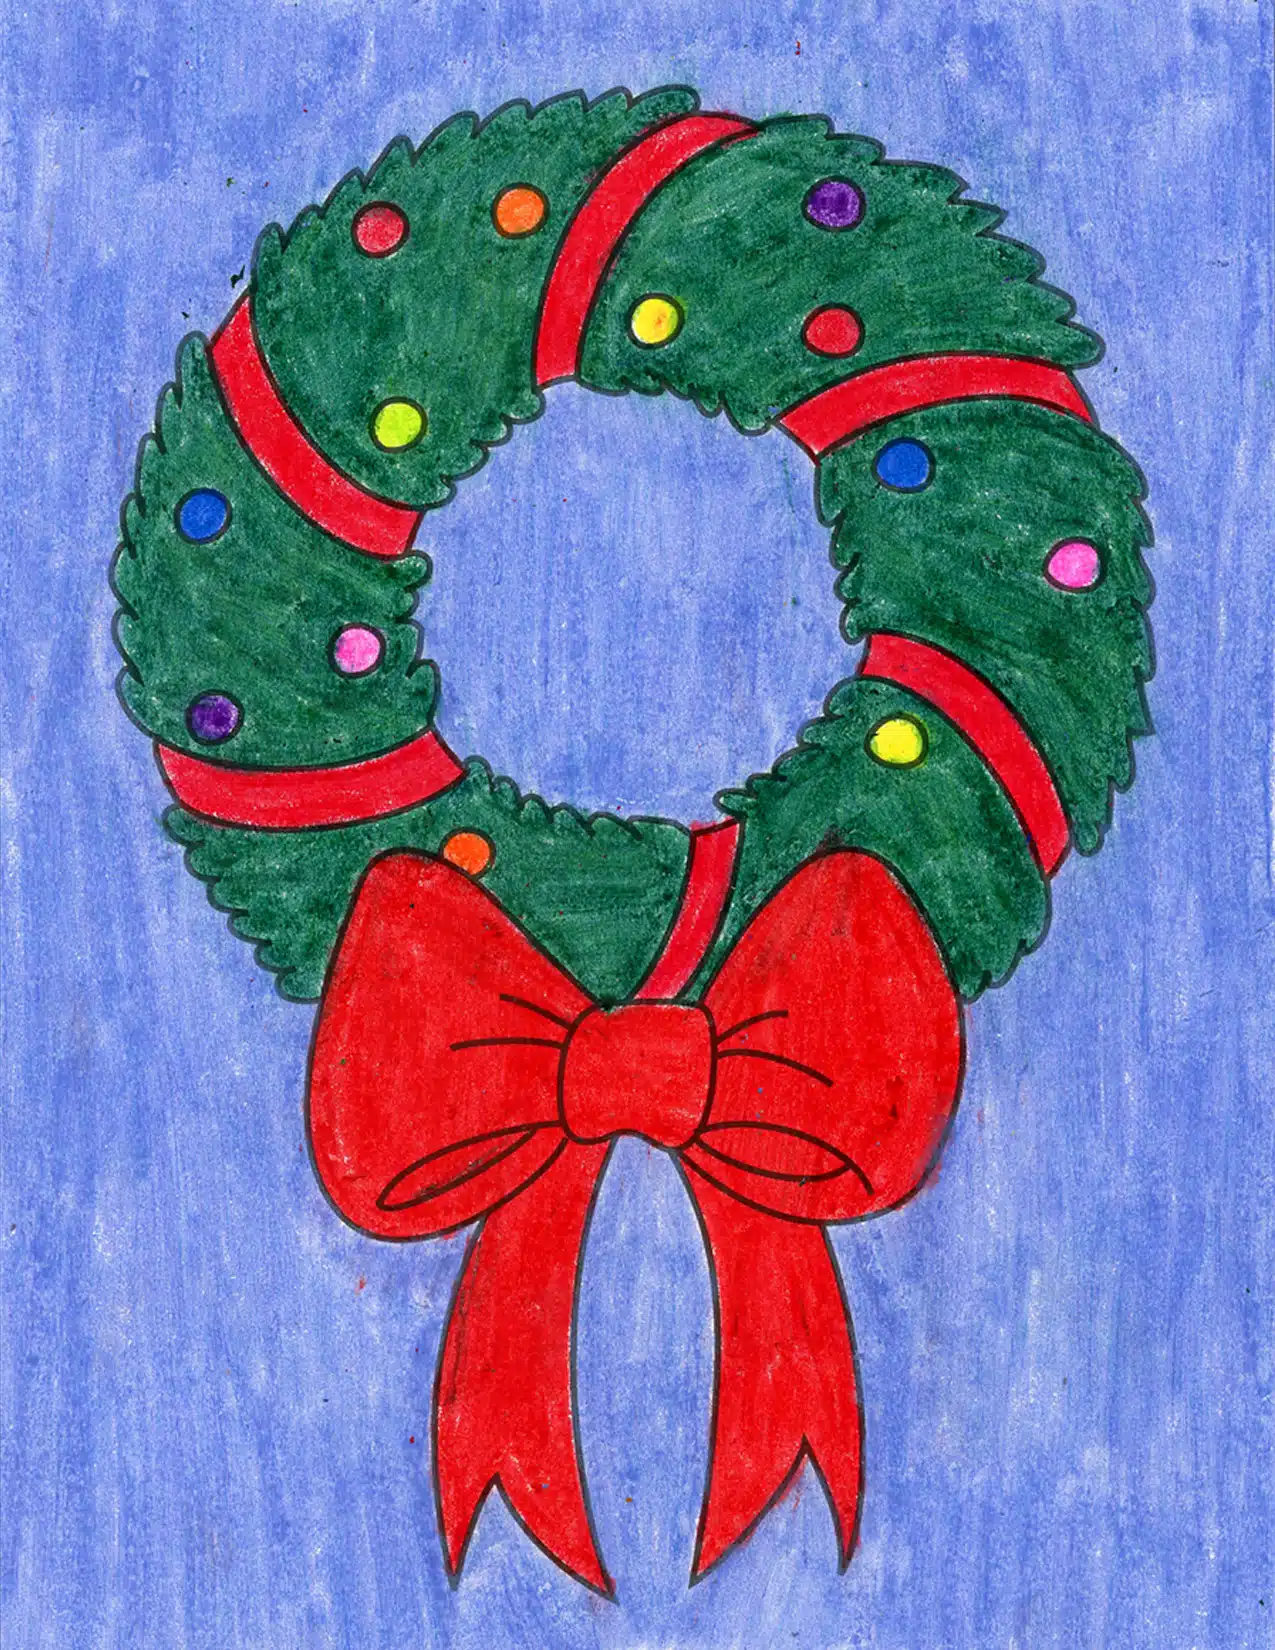 Easy How to Draw a Wreath Tutorial Video and Wreath Coloring Page